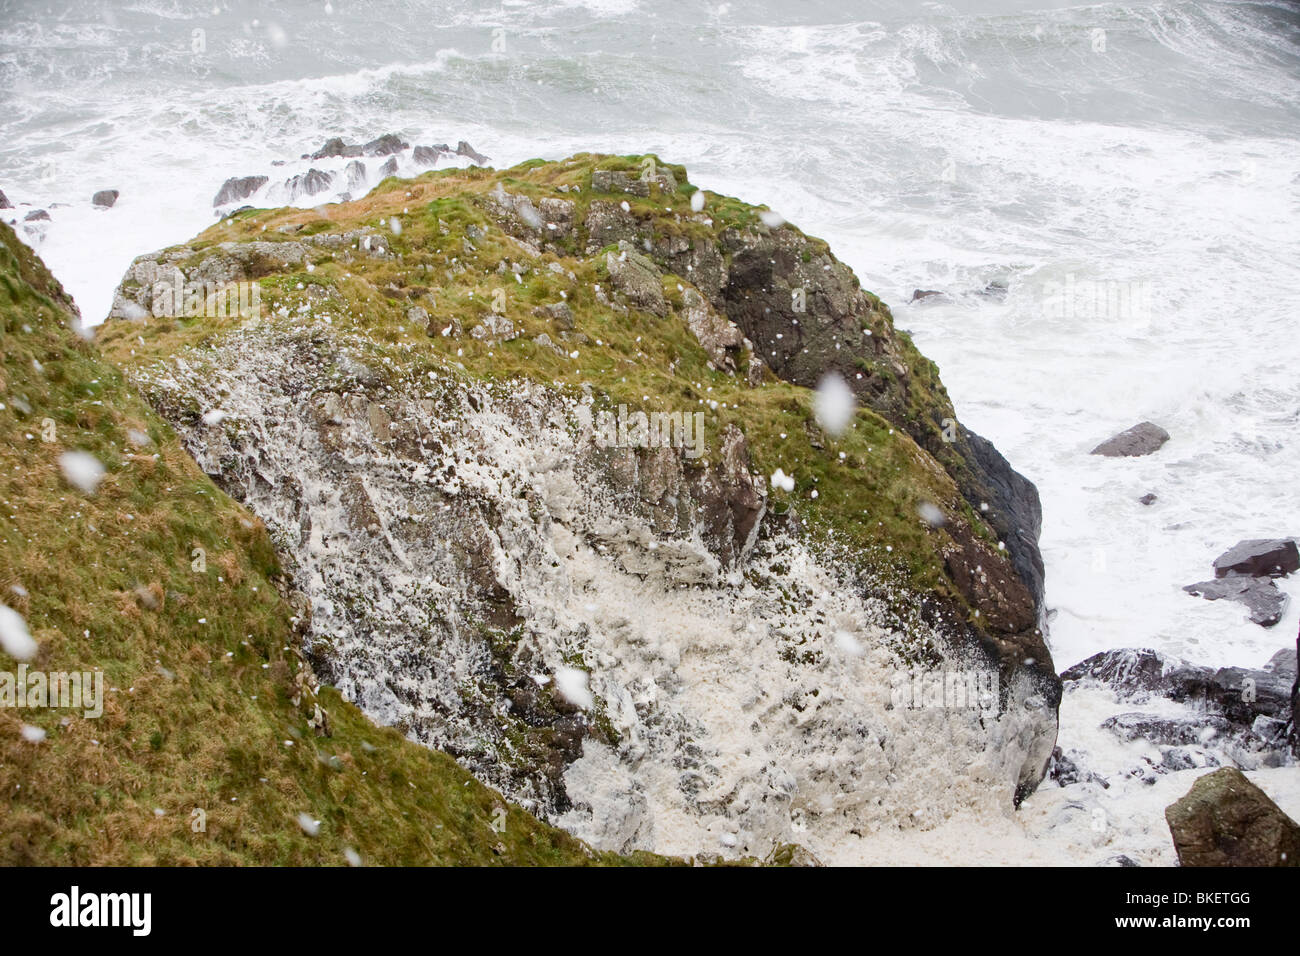 Spume blown inland from a stormy sea on The Rhins of Galloway Scotland UK. Stock Photo